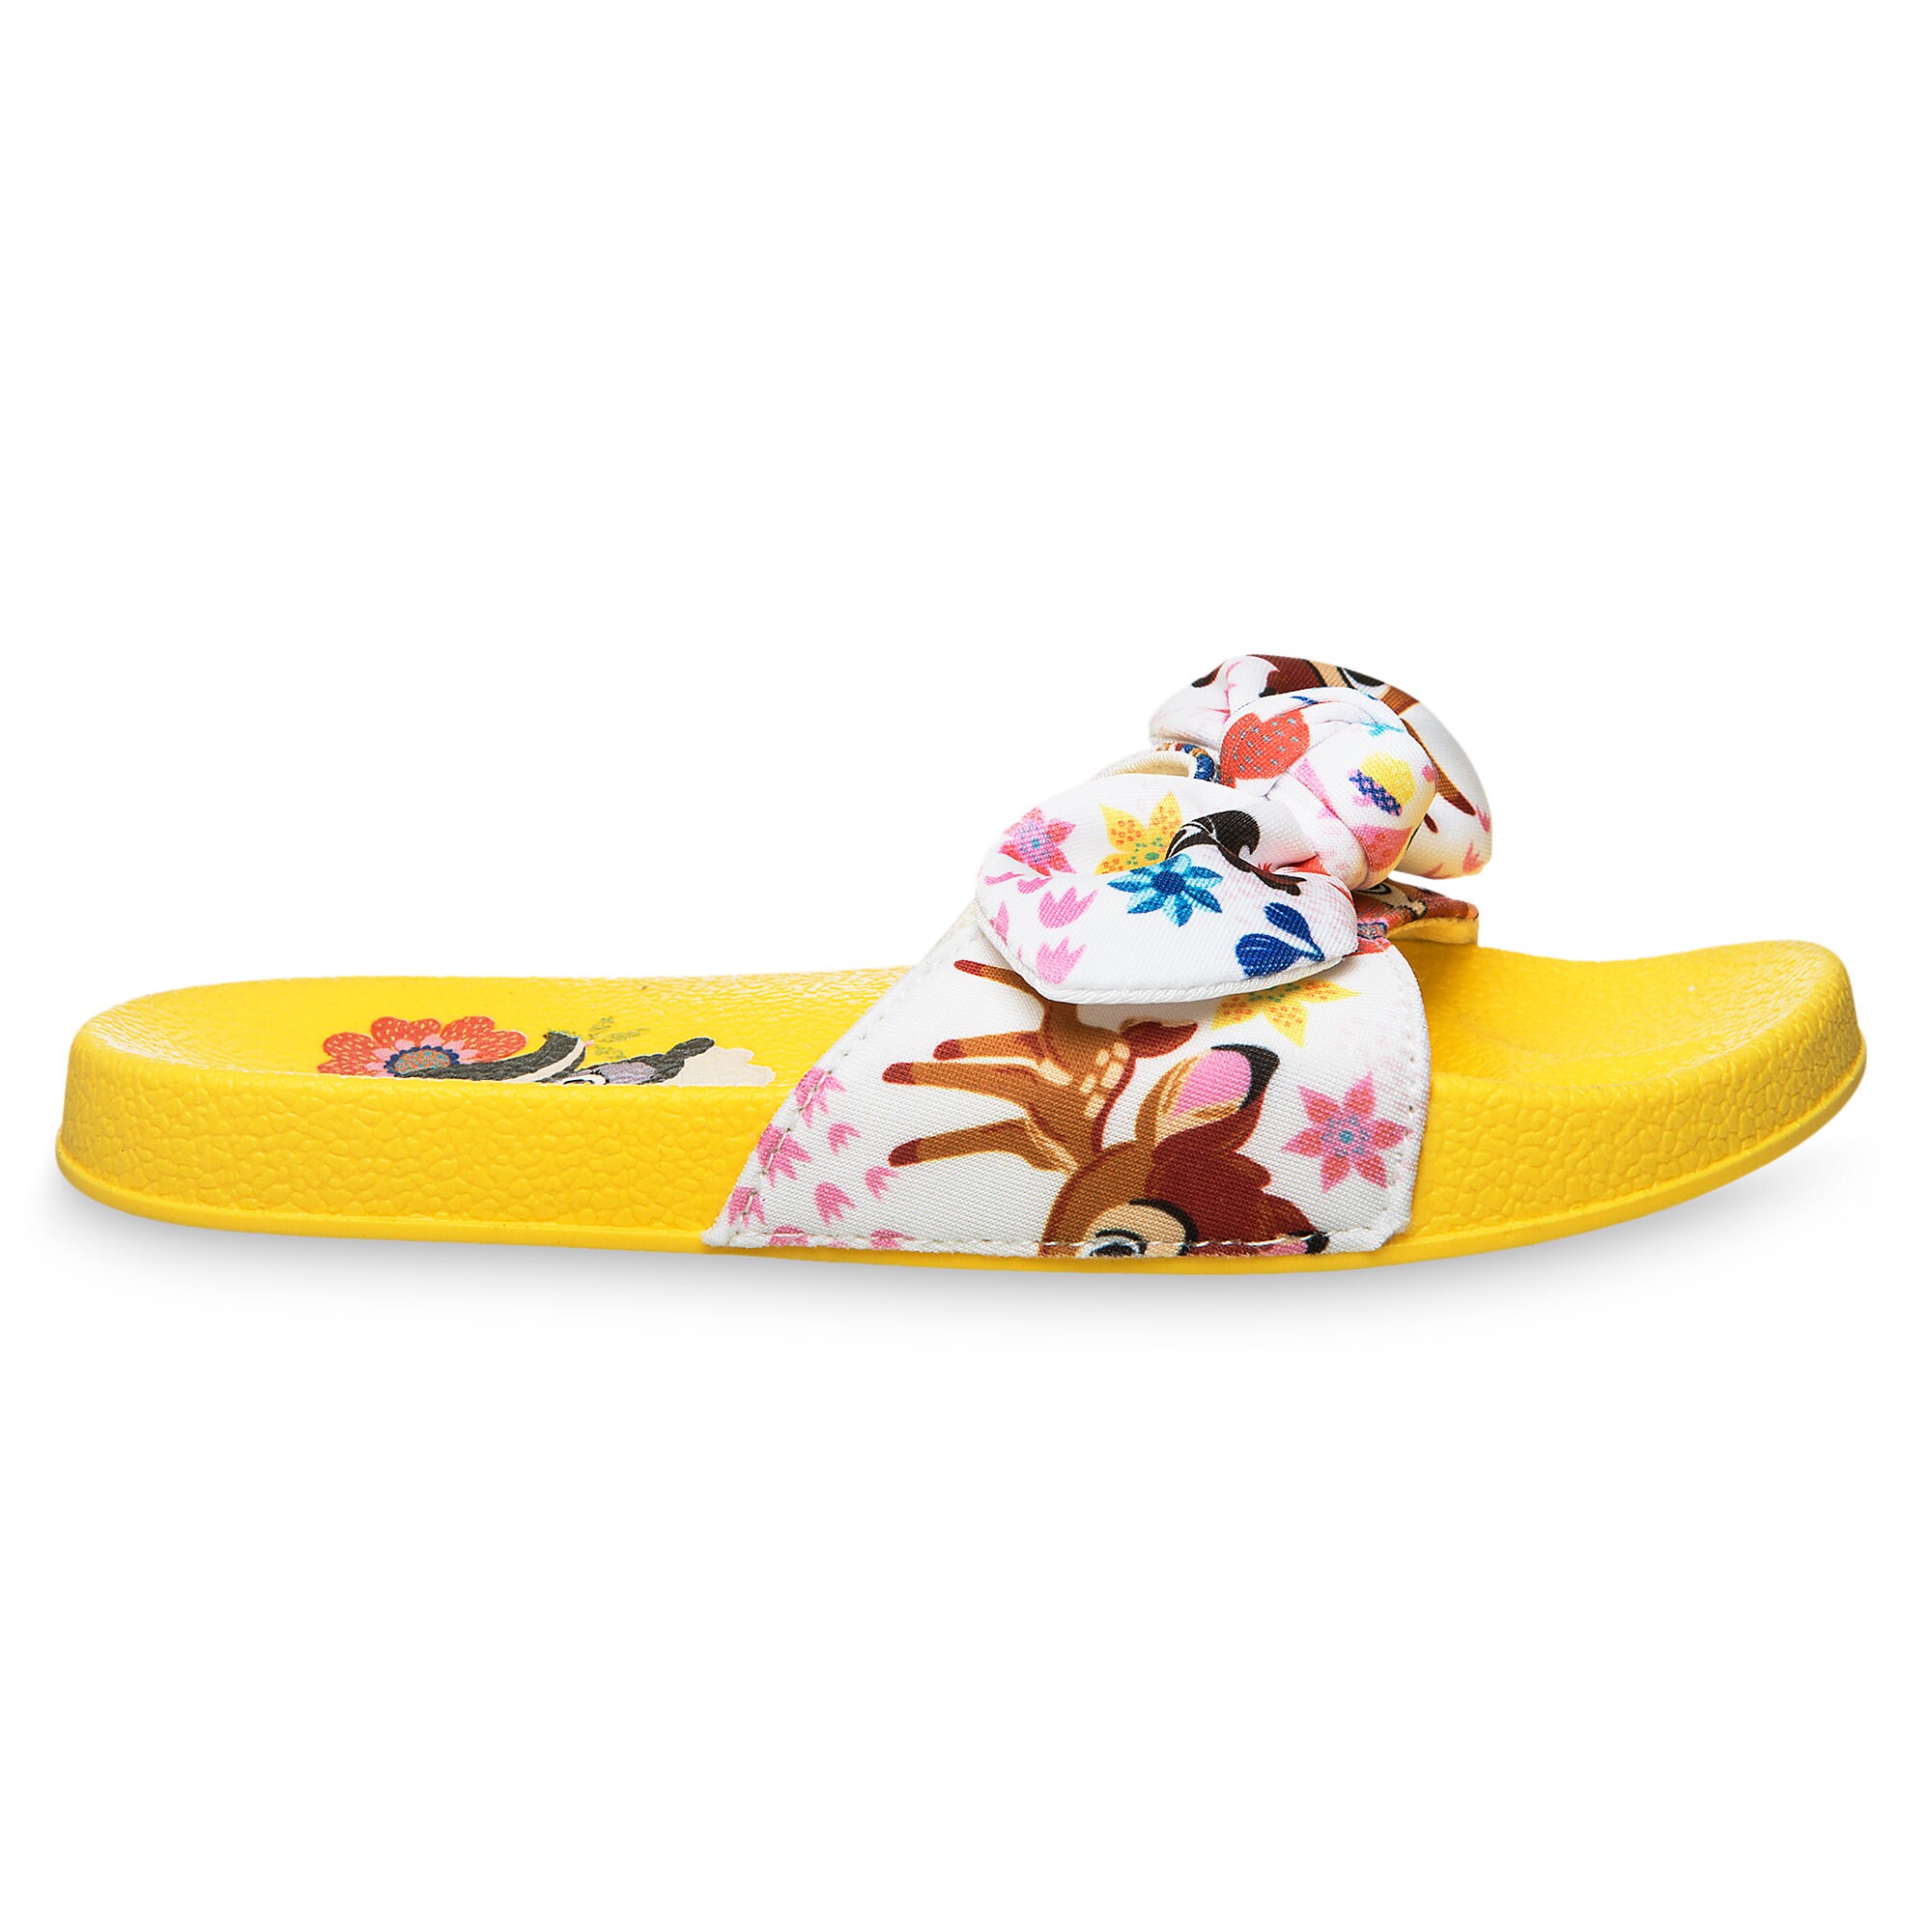 Bambi and Friends Slides for Girls - Disney Furrytale friends